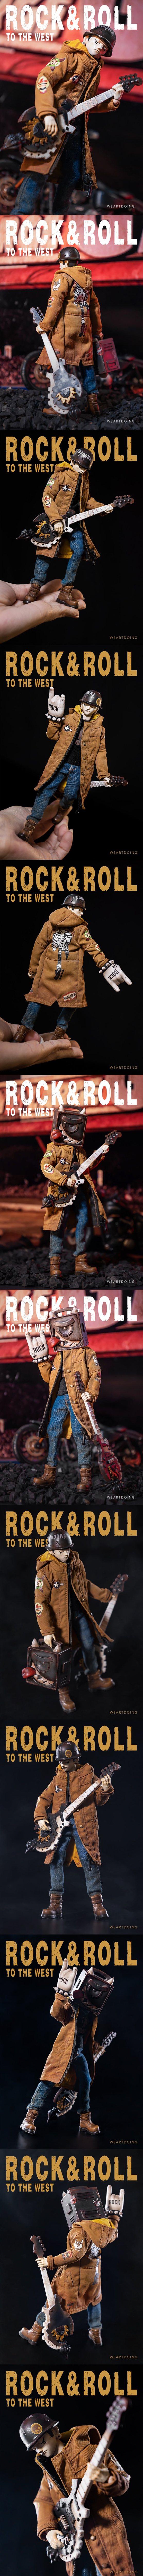 WeArtDoing Rock&Roll to the West Tripitaka 1/12 Collectible Action Figurine